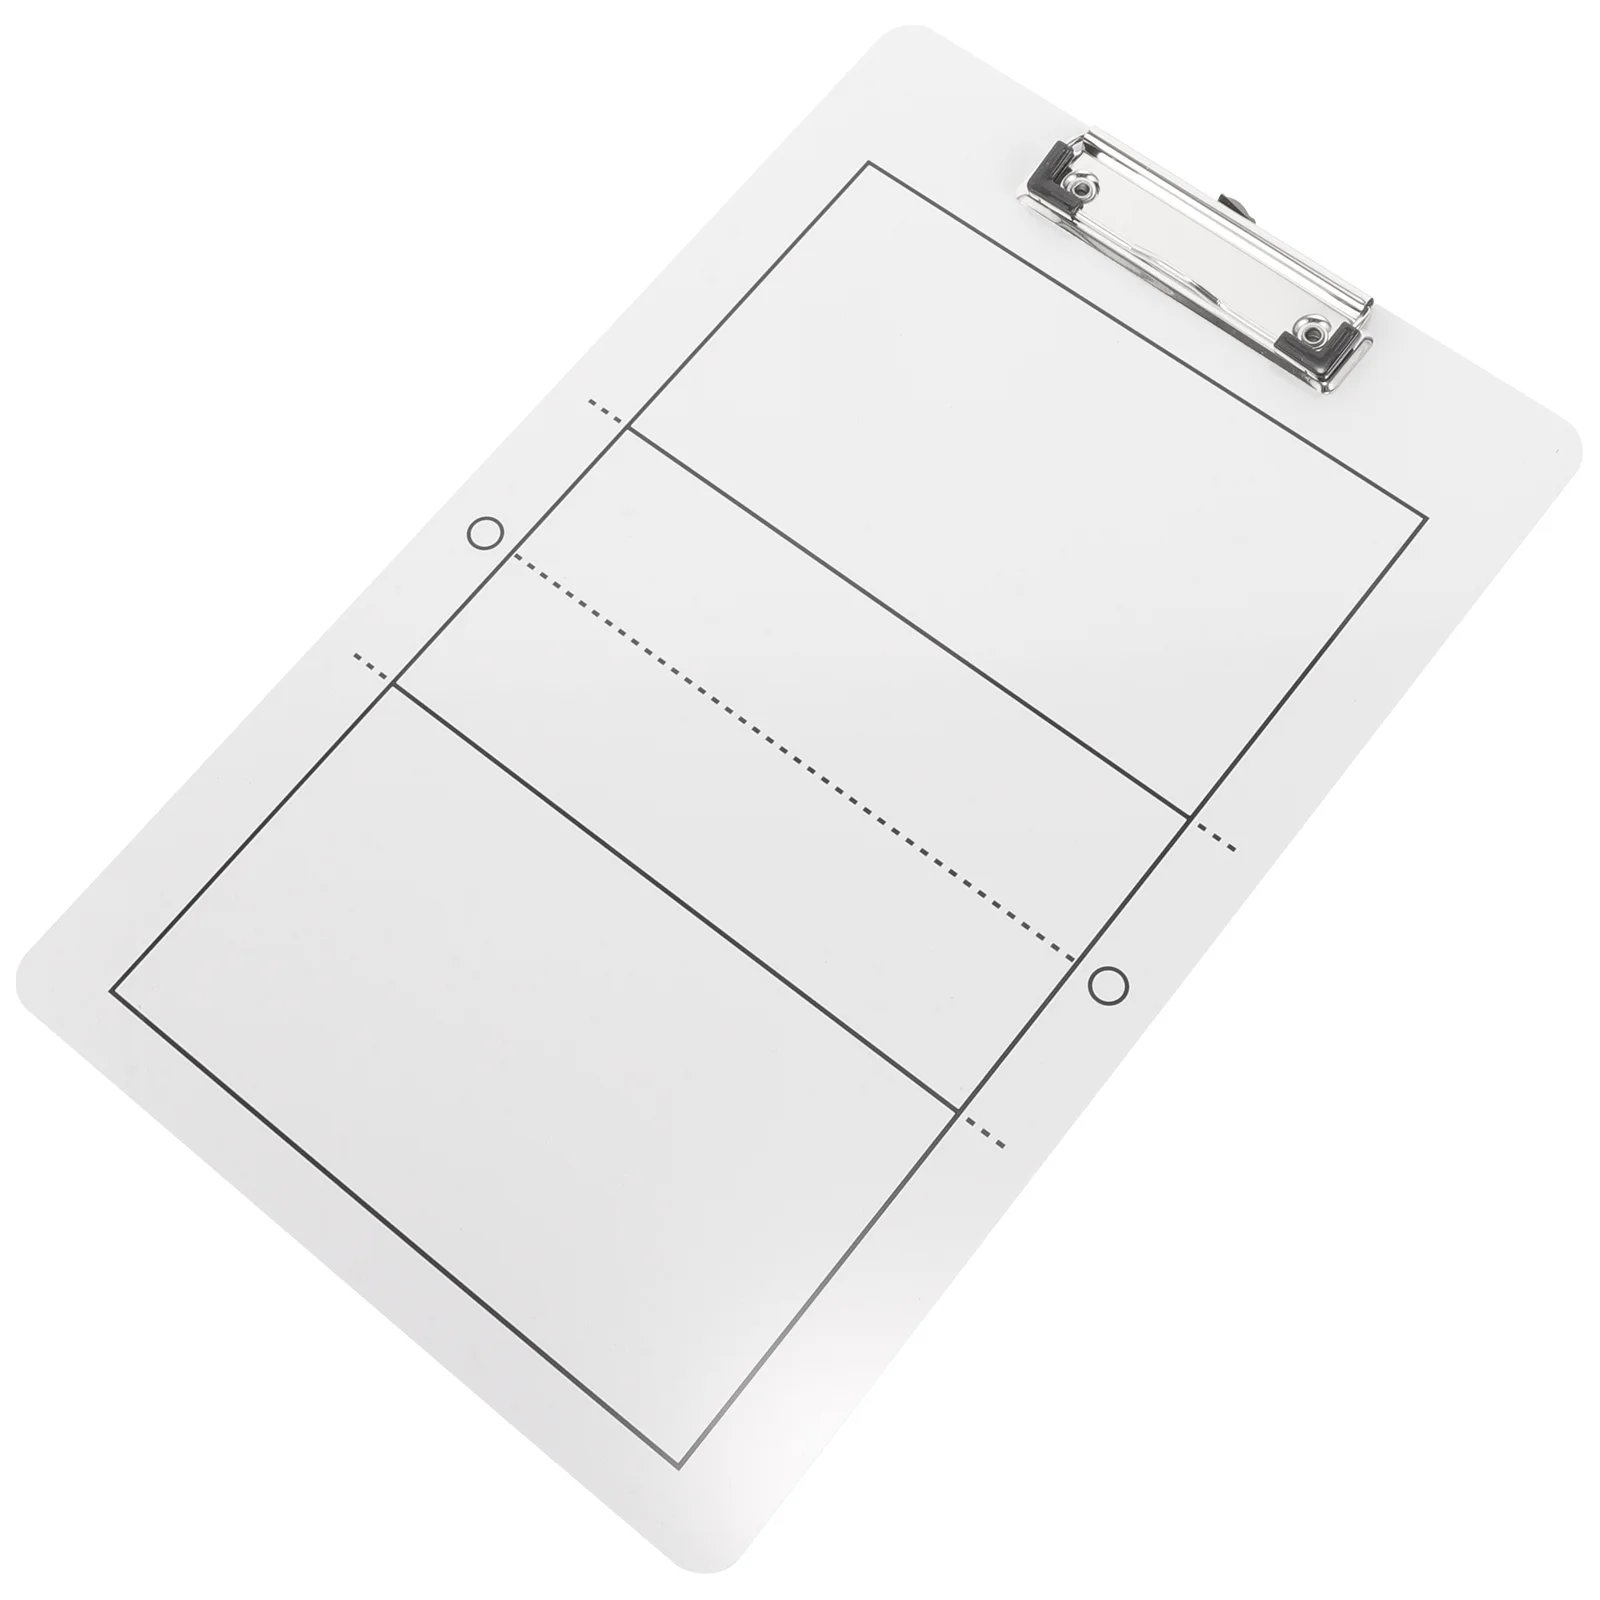 

Volleyball Clipboard For Coaches Board Coaching Equipment Coaches Clipboard Scoreboard/Substitution Board/